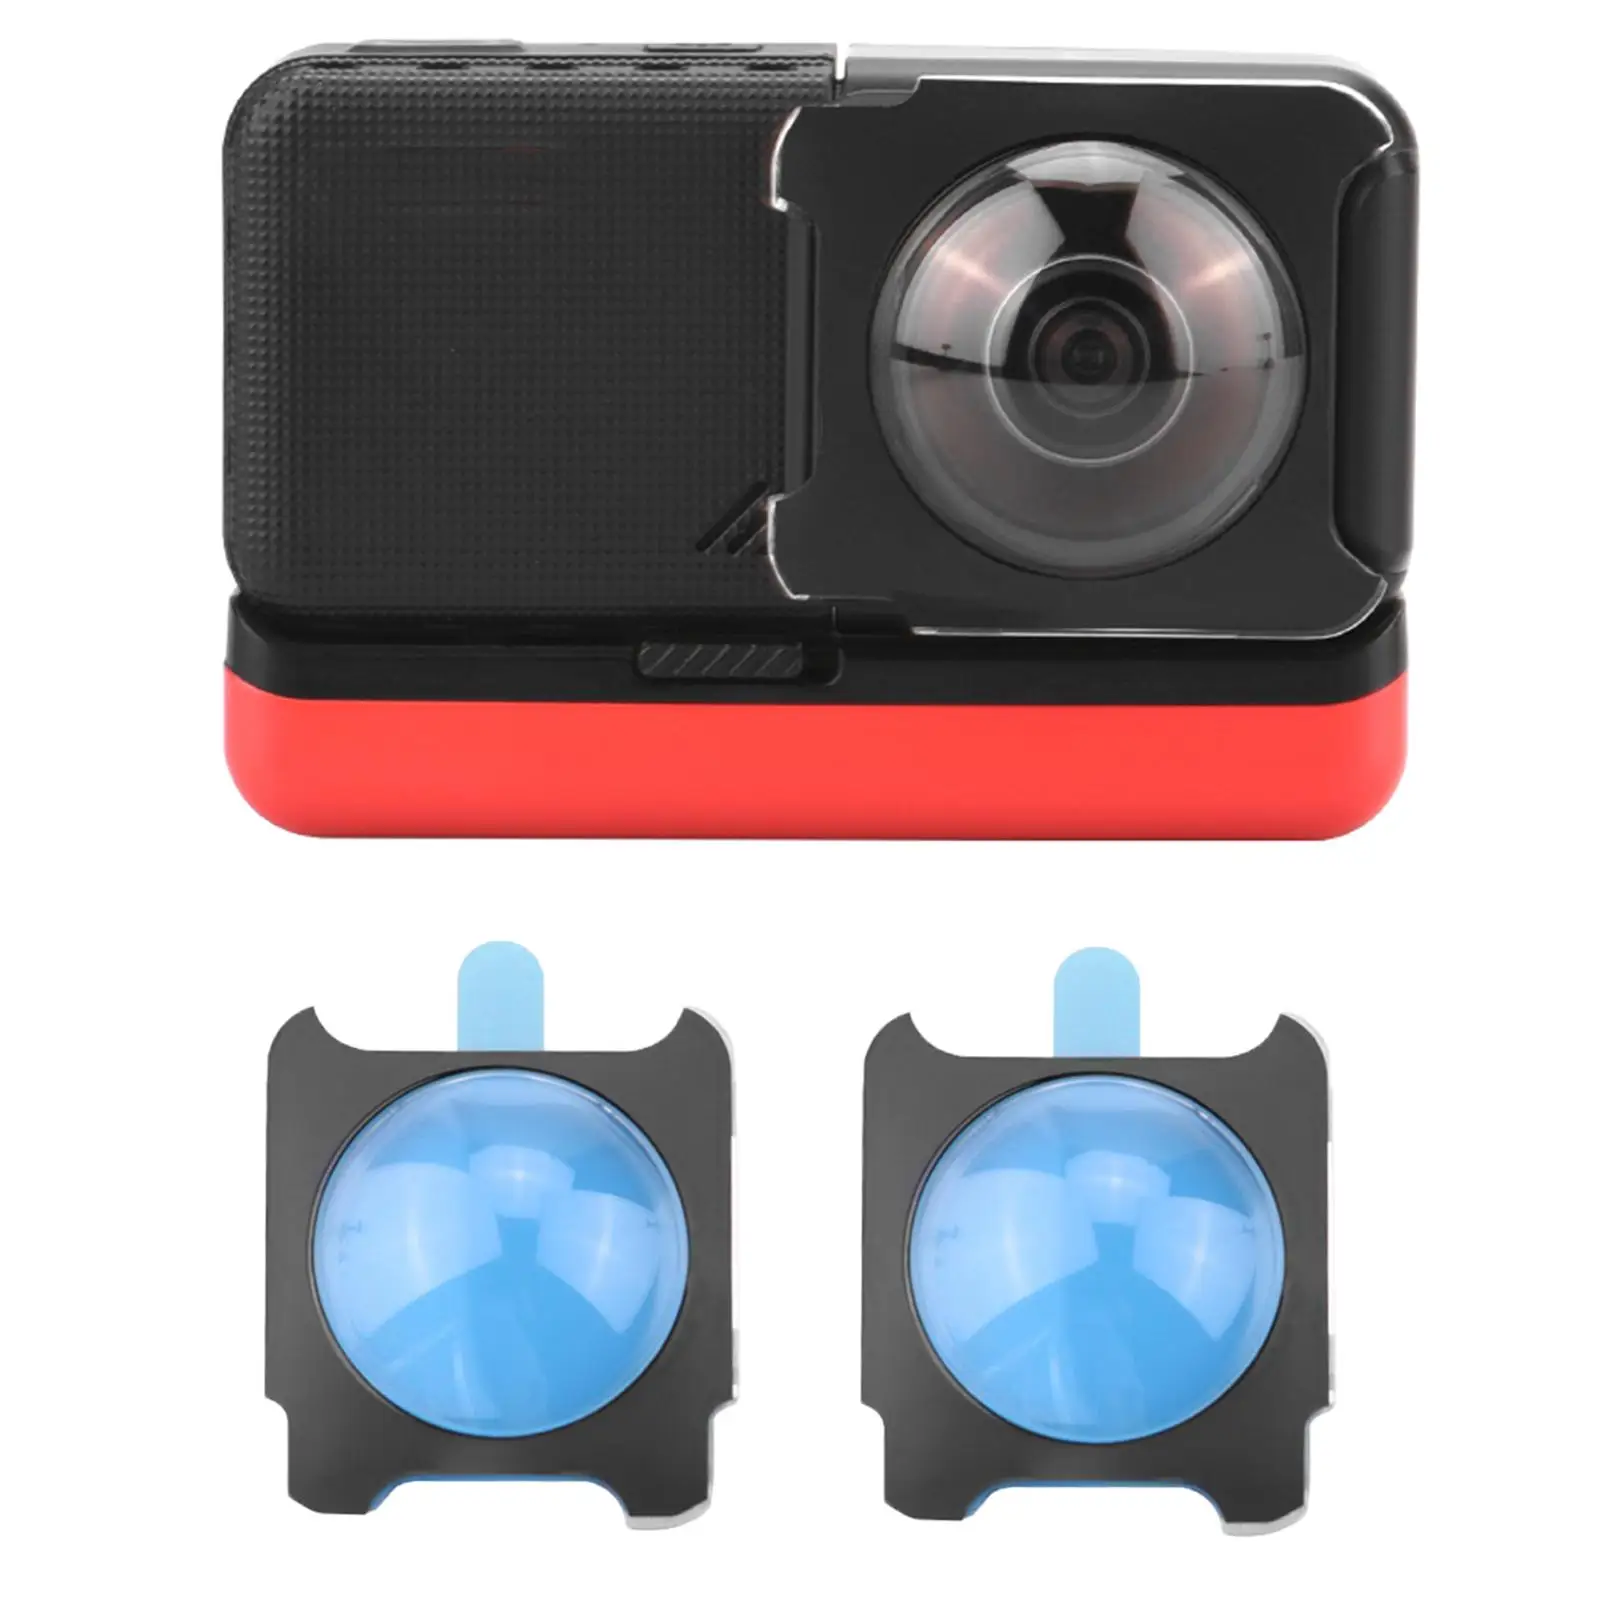 2Pcs Panoramic Lens Protector Lens Guards Caps for/R Camera Accessories clearly recover shooting colors of the lens;